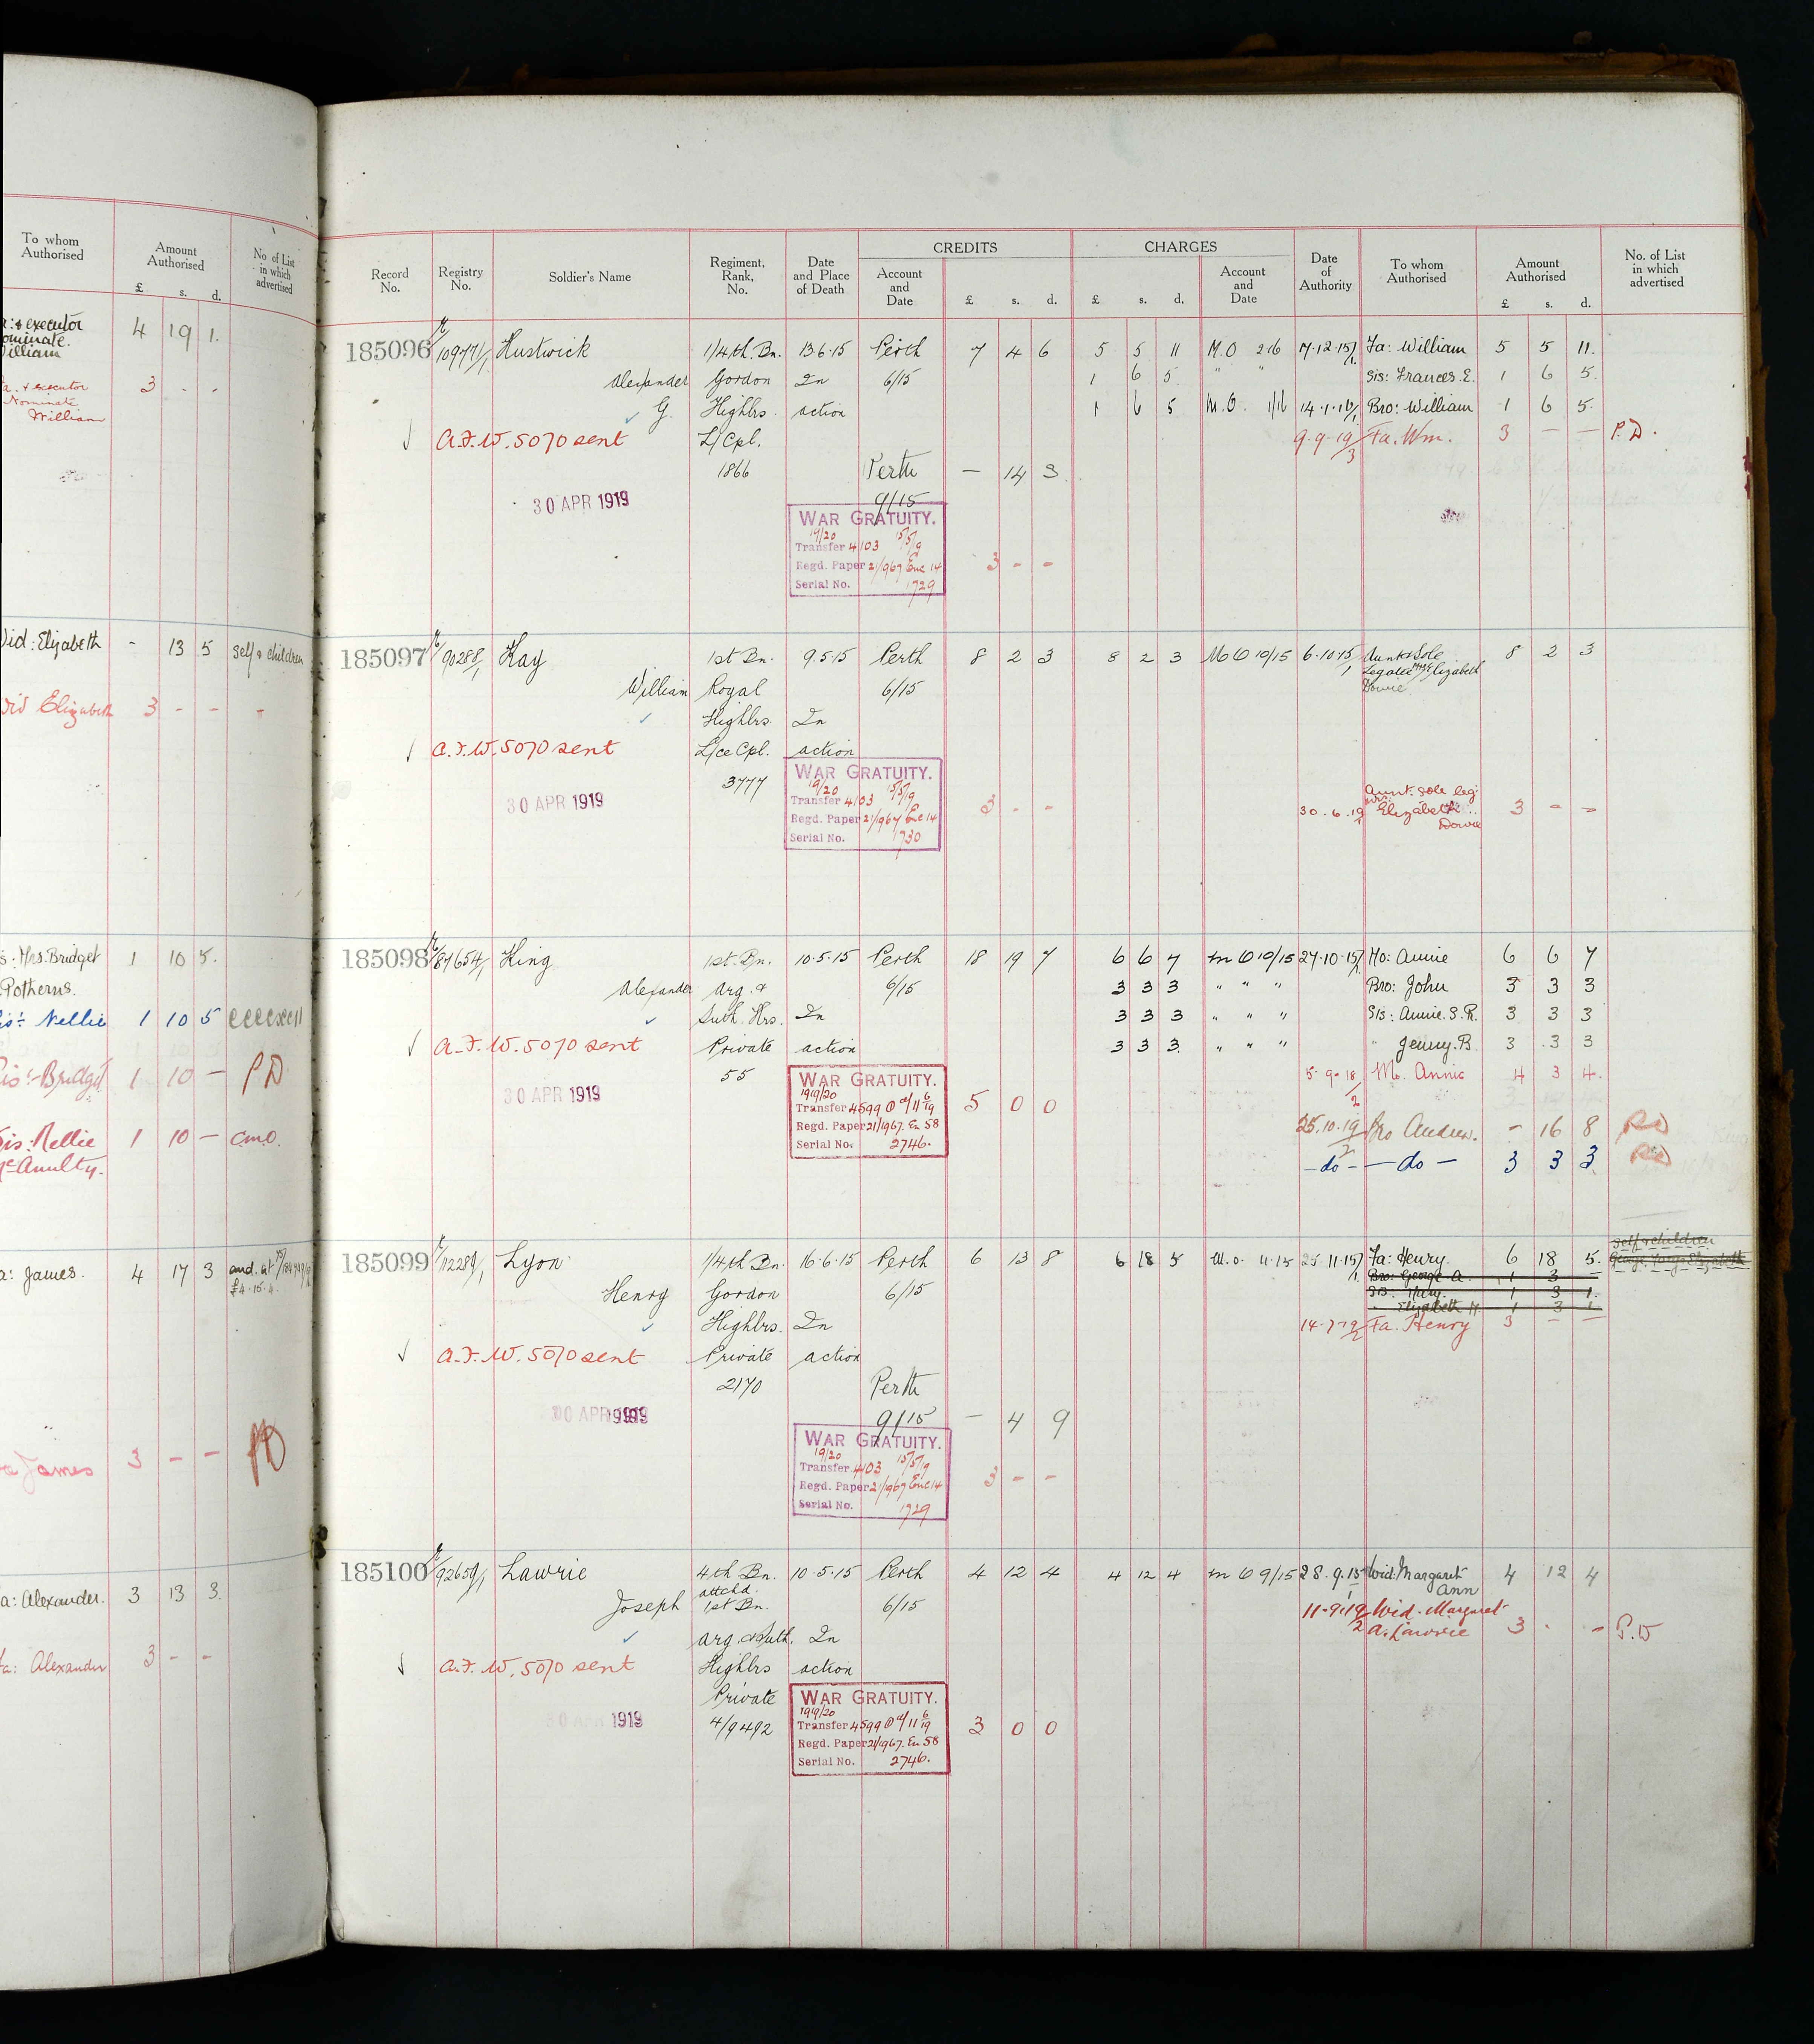 UK, Army Registers of Soldiers' Effects, 1901-1929